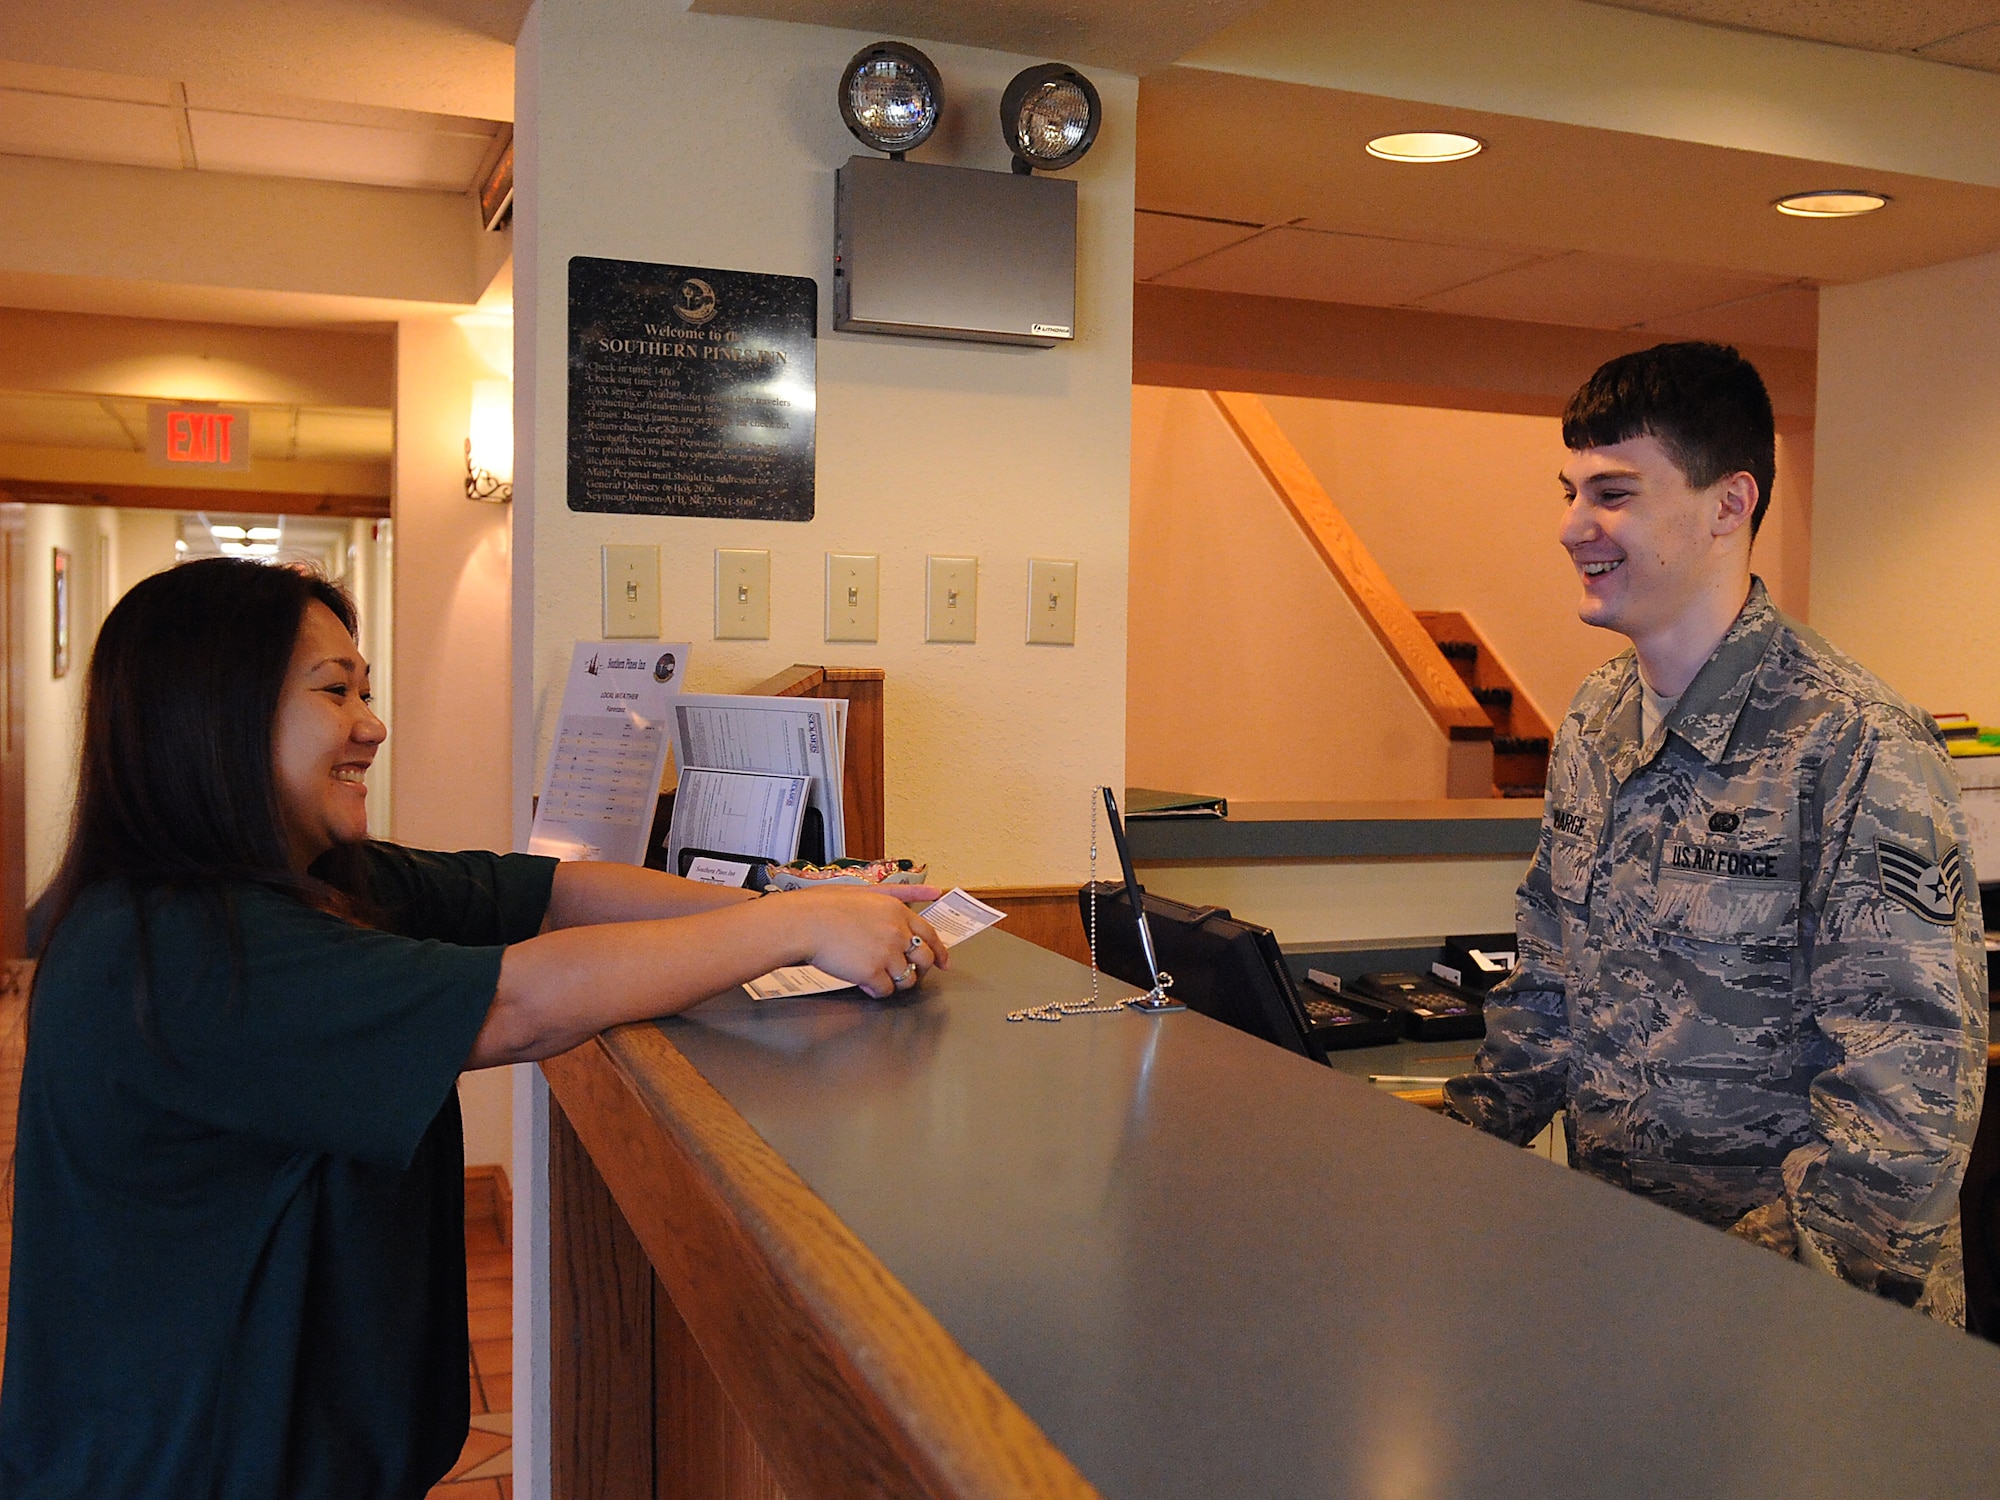 Staff Sgt. Benjamin Robarge, 4th Force Support Squadron, thanks Irene Nash for staying at the Southern Pines Inn at Seymour Johnson Air Force Base, N.C., April 14, 2009. As a customer service representative Sergeant Robarge strives to leave a good impression of the base to his customers through courtesy and providing helpful information. (U.S. Air Force photo by Airman 1st Class Whitney S. Lambert)